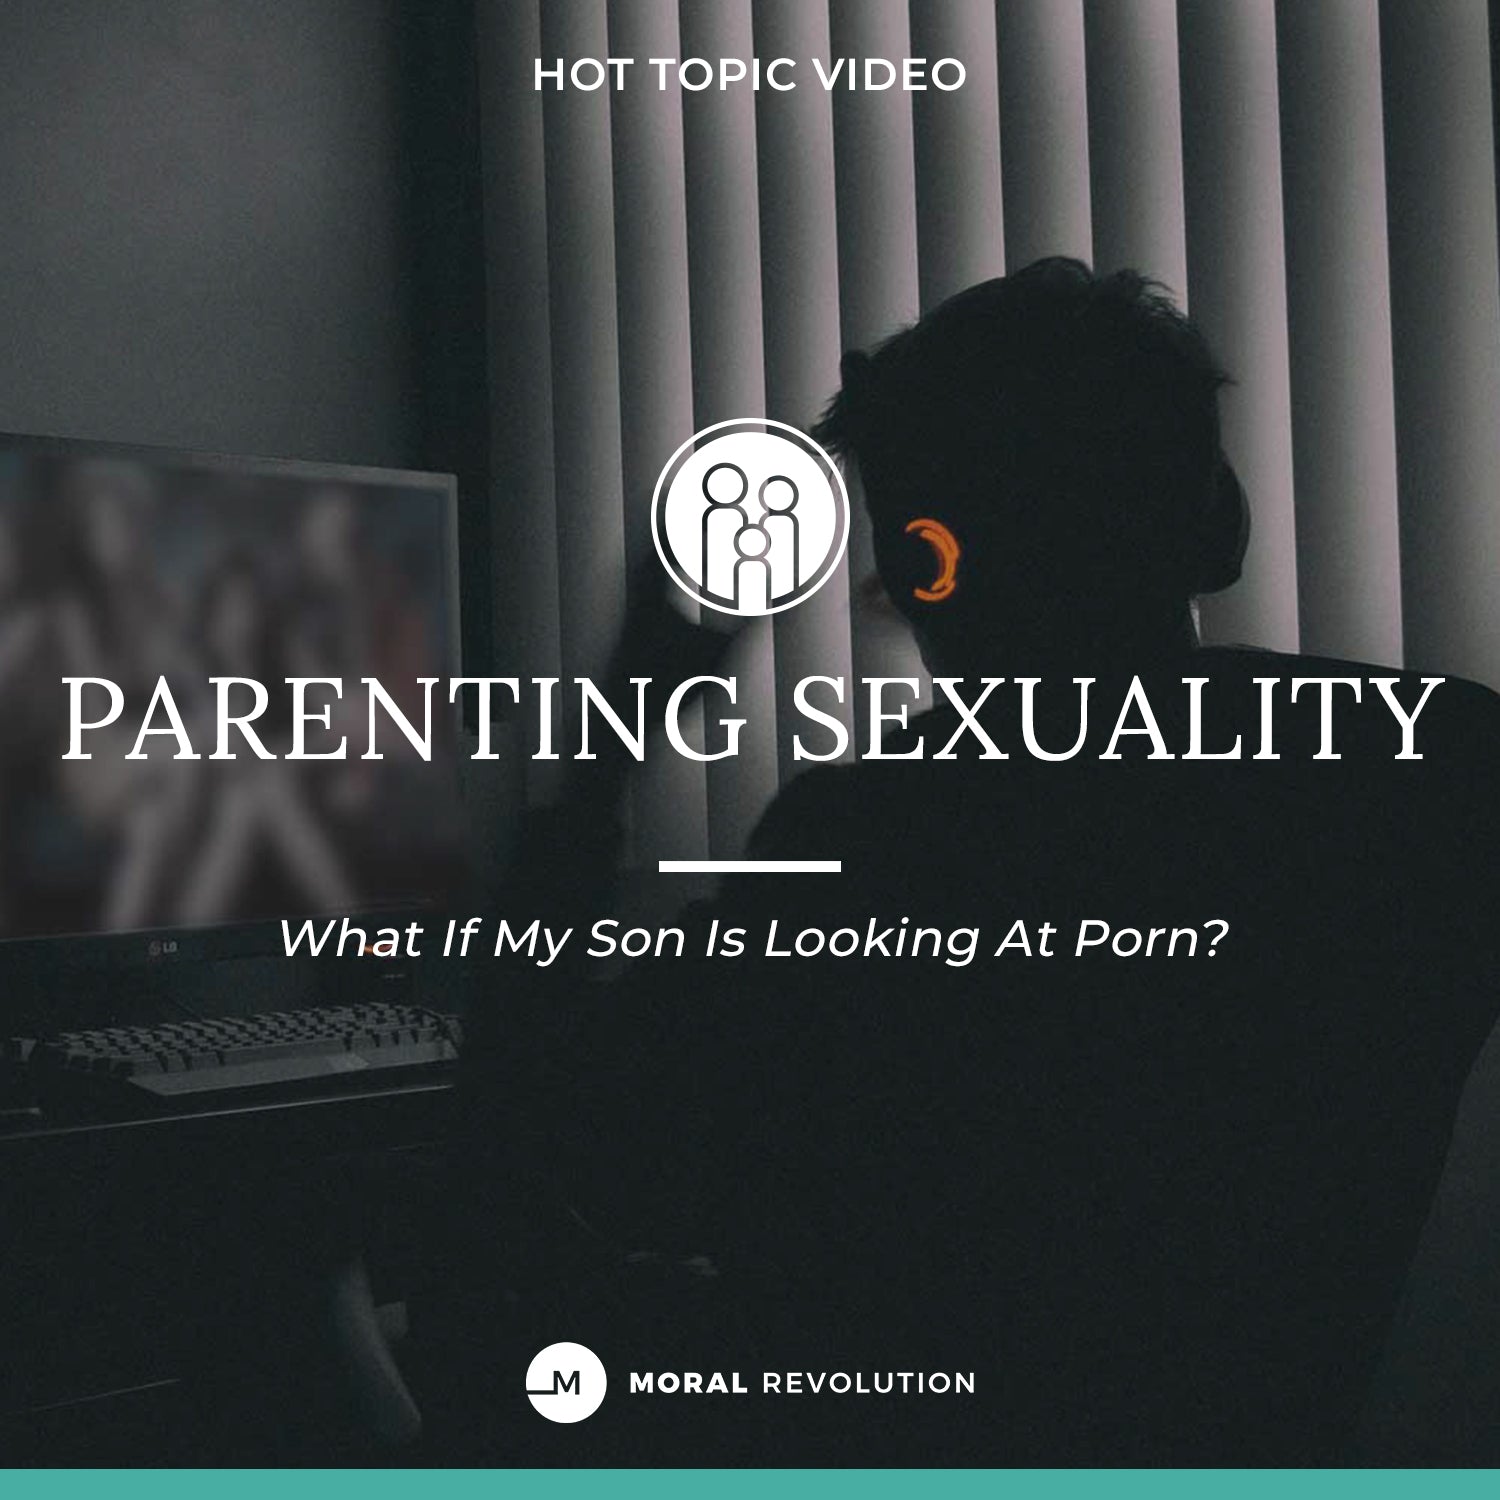 Hot Topic - Hot Topic: What If My Son Is Looking At Porn? â€“ Moral Revolution